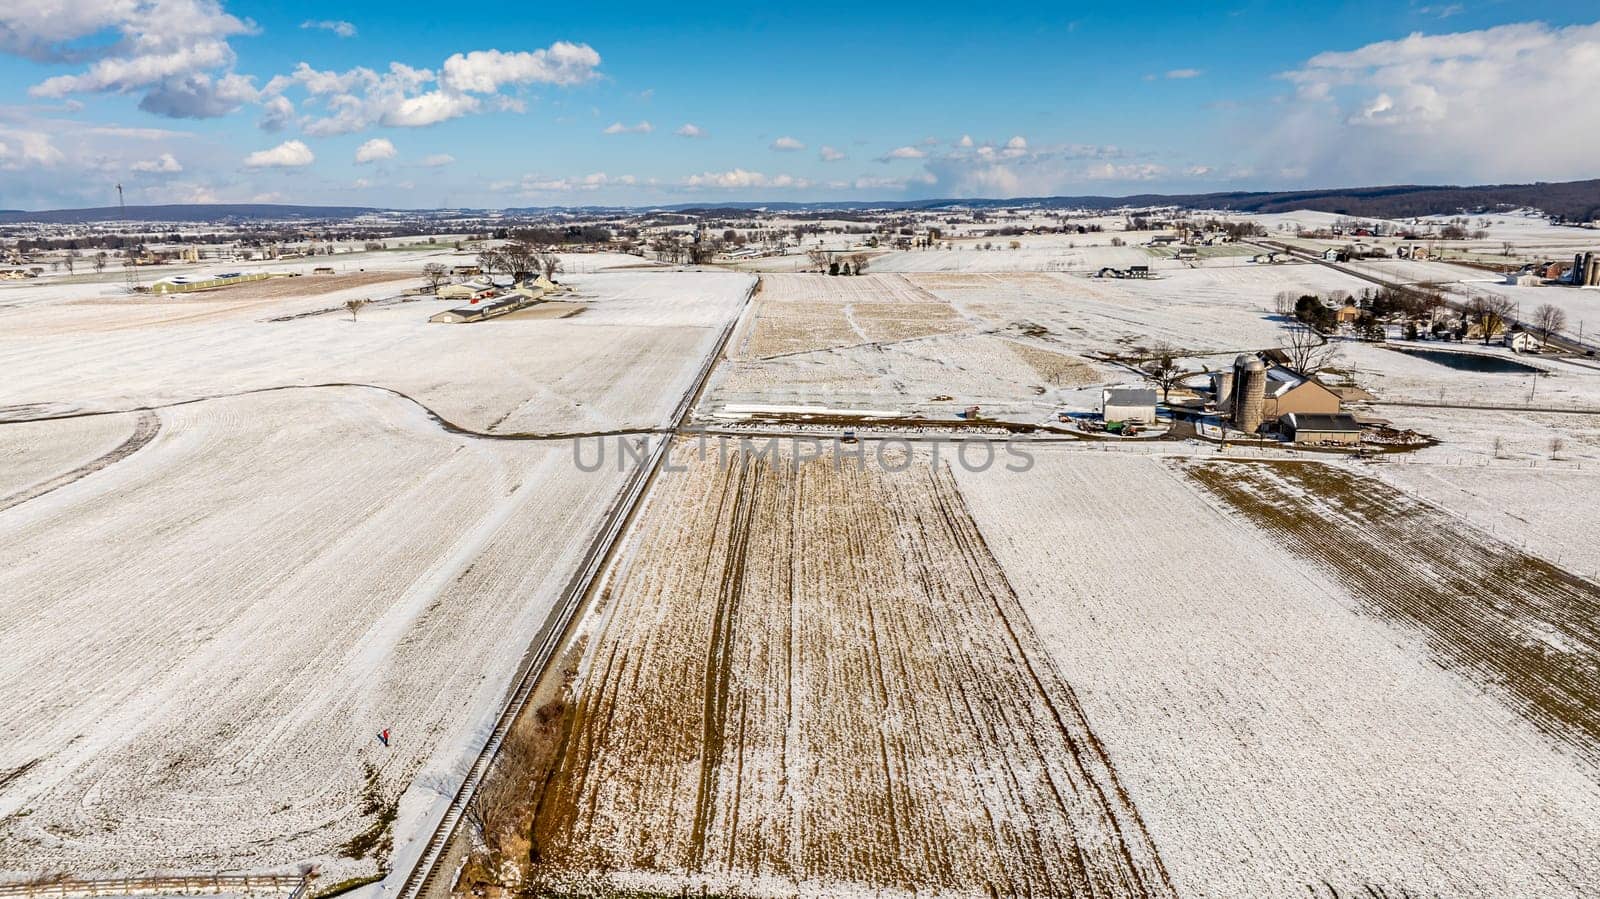 Aerial View Of Expansive Snow-Dusted Farmland With Rural Buildings And Silos. by actionphoto50